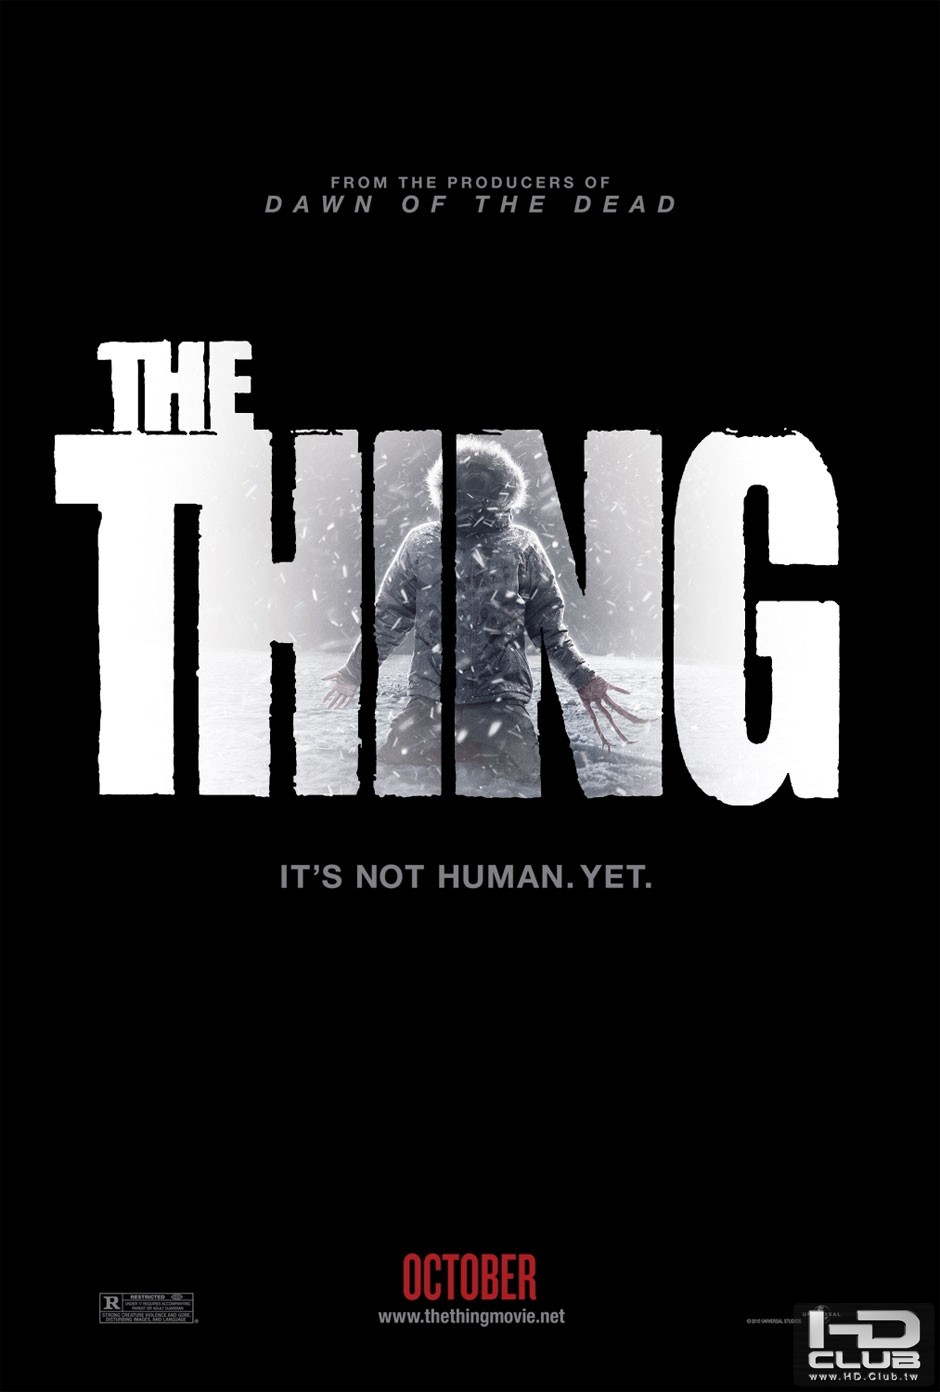 The-Thing-2011-Movie-Teaser-Poster111016070939.jpg